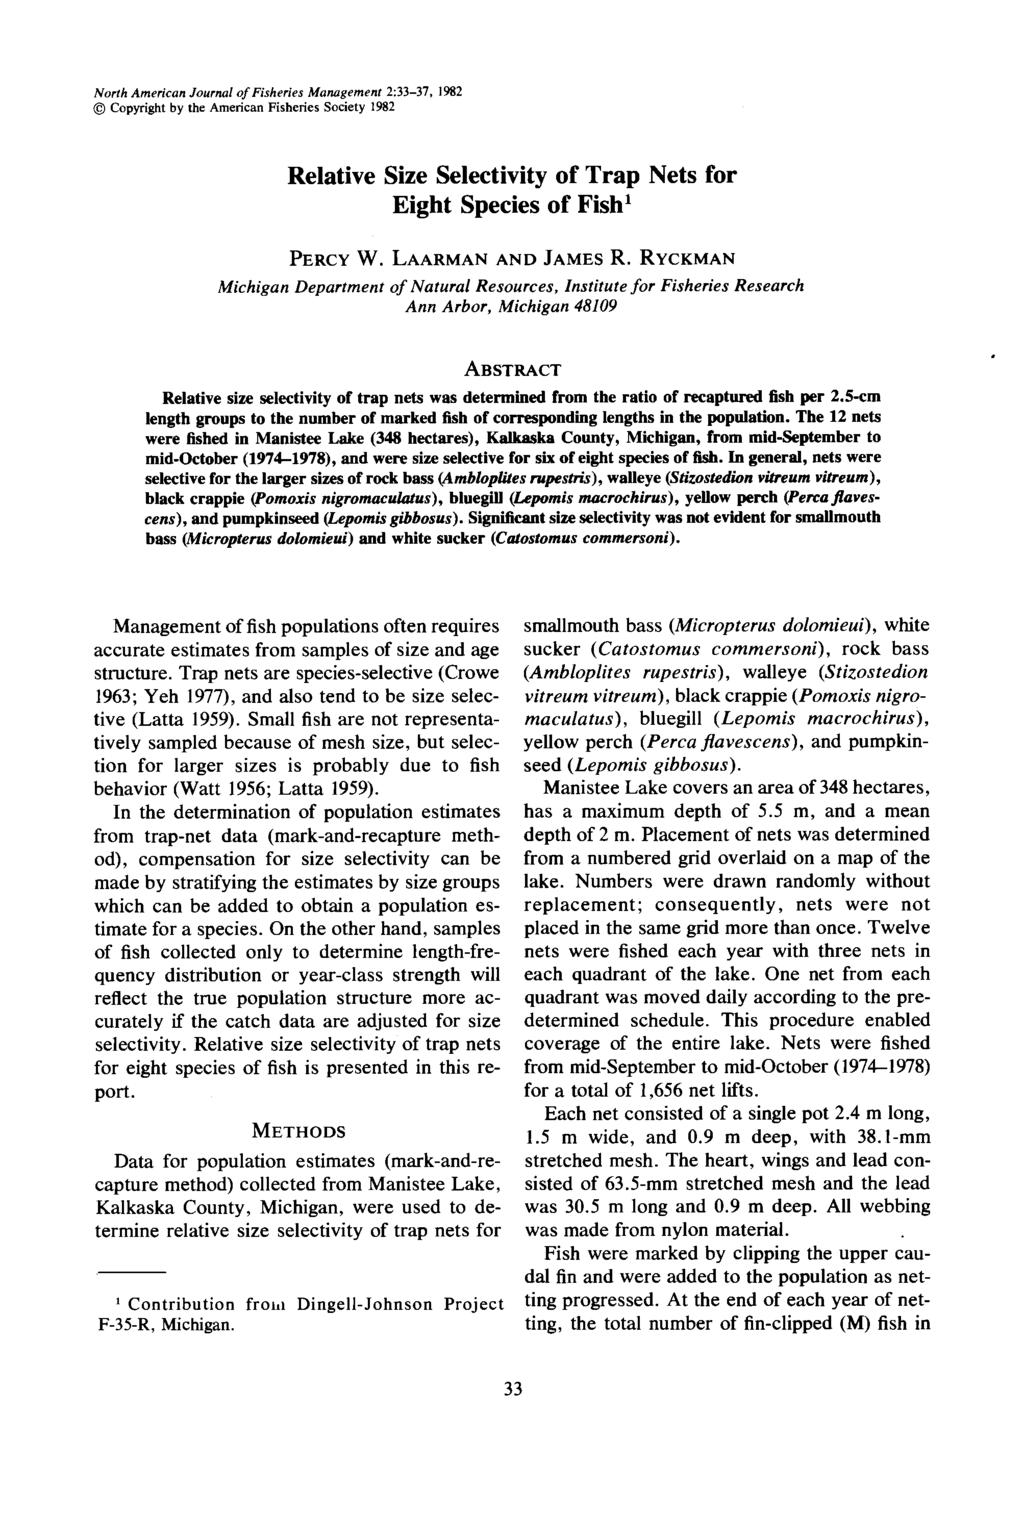 North American Journal of Fisheries Management 2:33-37, 1982 Copyright by the American Fisheries Society 1982 Relative Size Selectivity of Trap Nets for Eight Species of Fish' PERCY W.